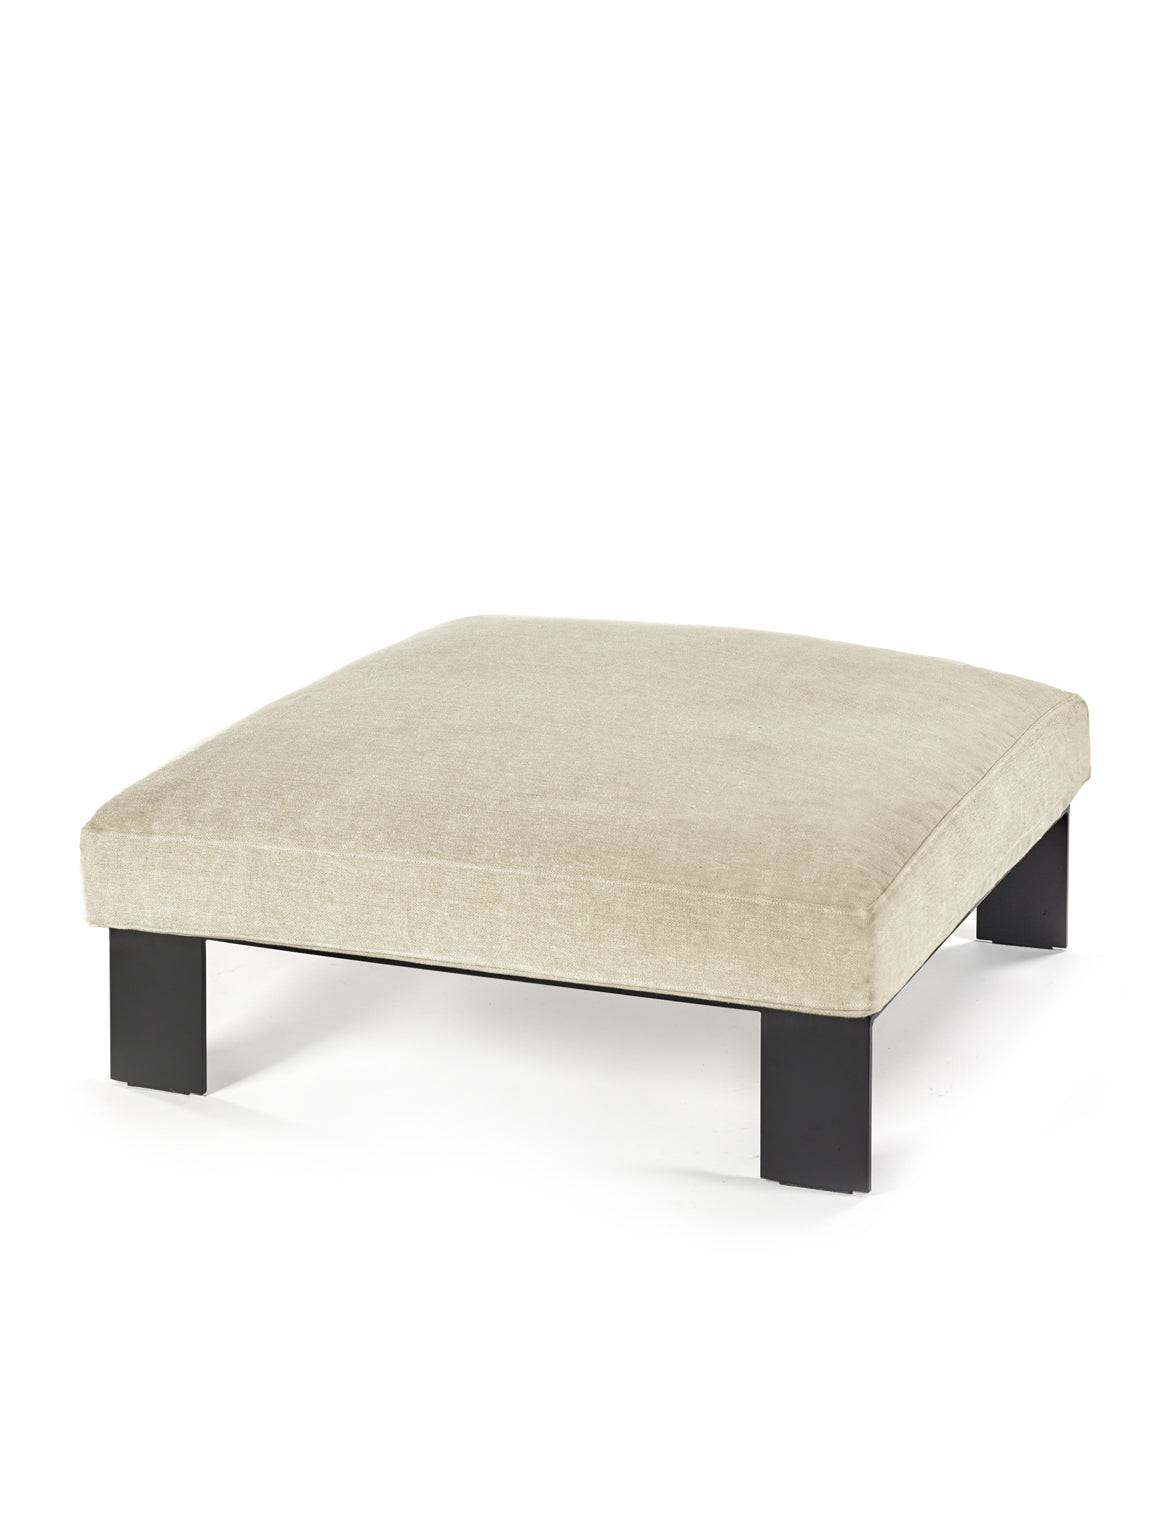 Mombaers Outdoor Ottoman - Chalk - THAT COOL LIVING